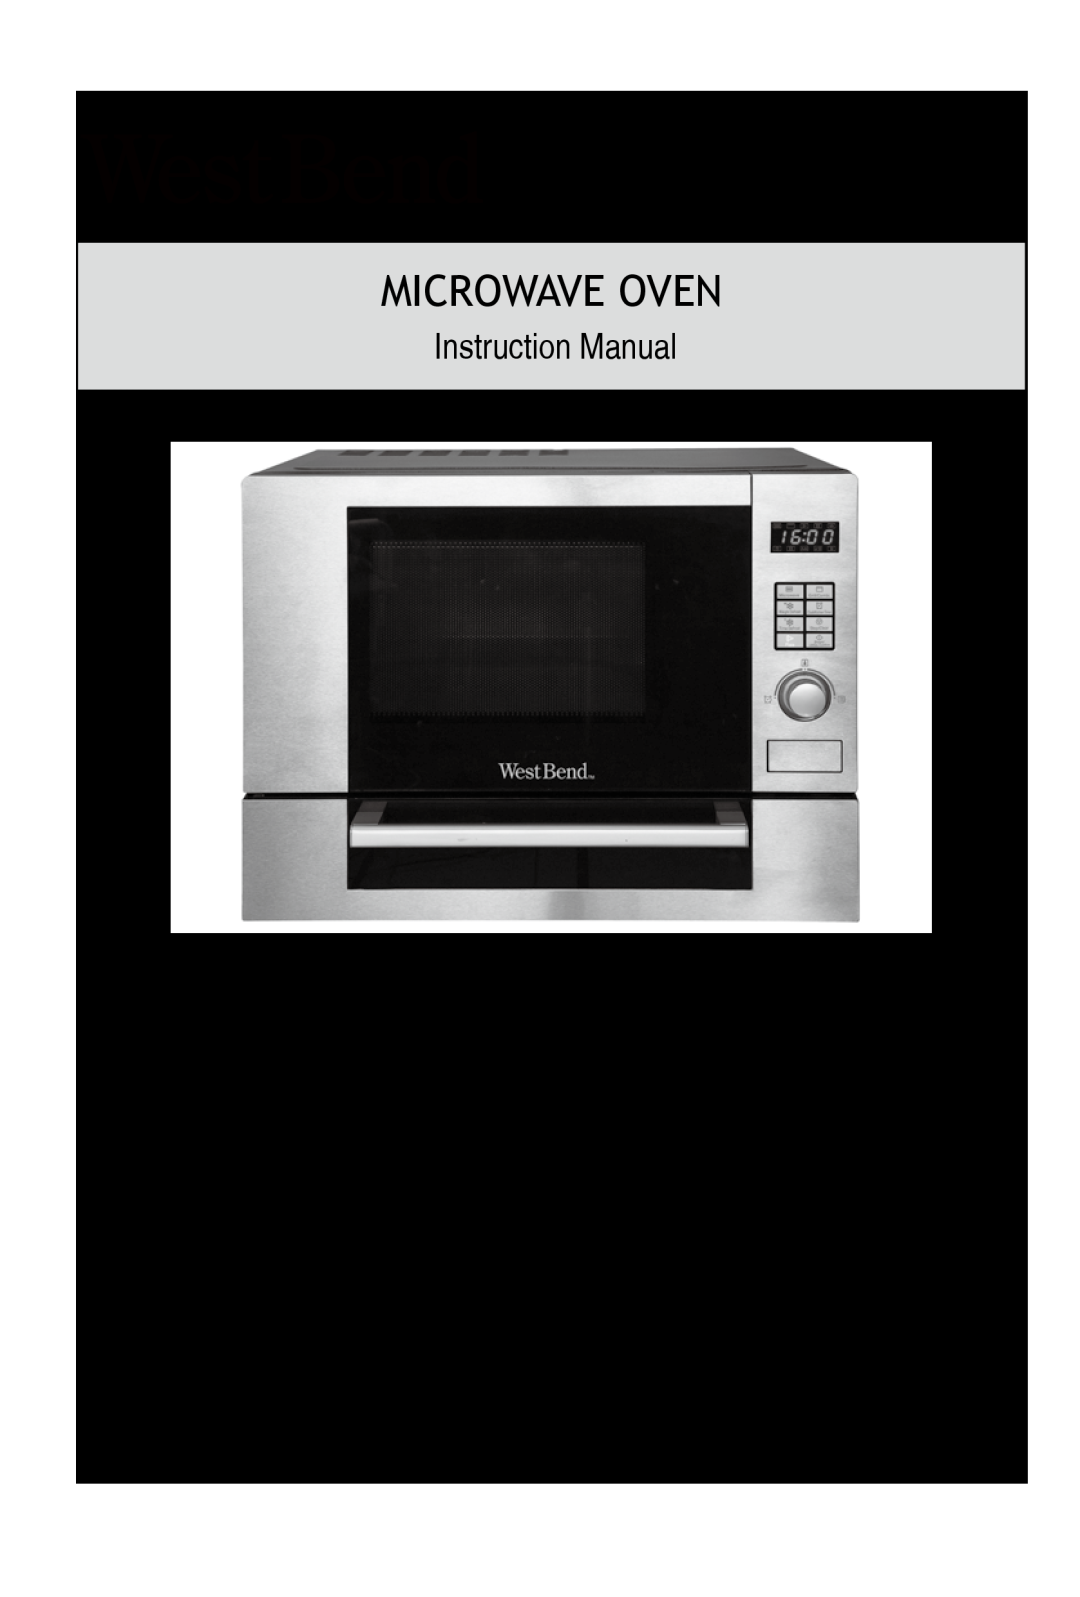 West Bend NJ 07054 instruction manual Important Safeguards, Setting Up Your Oven, Operation, Troubleshooting 